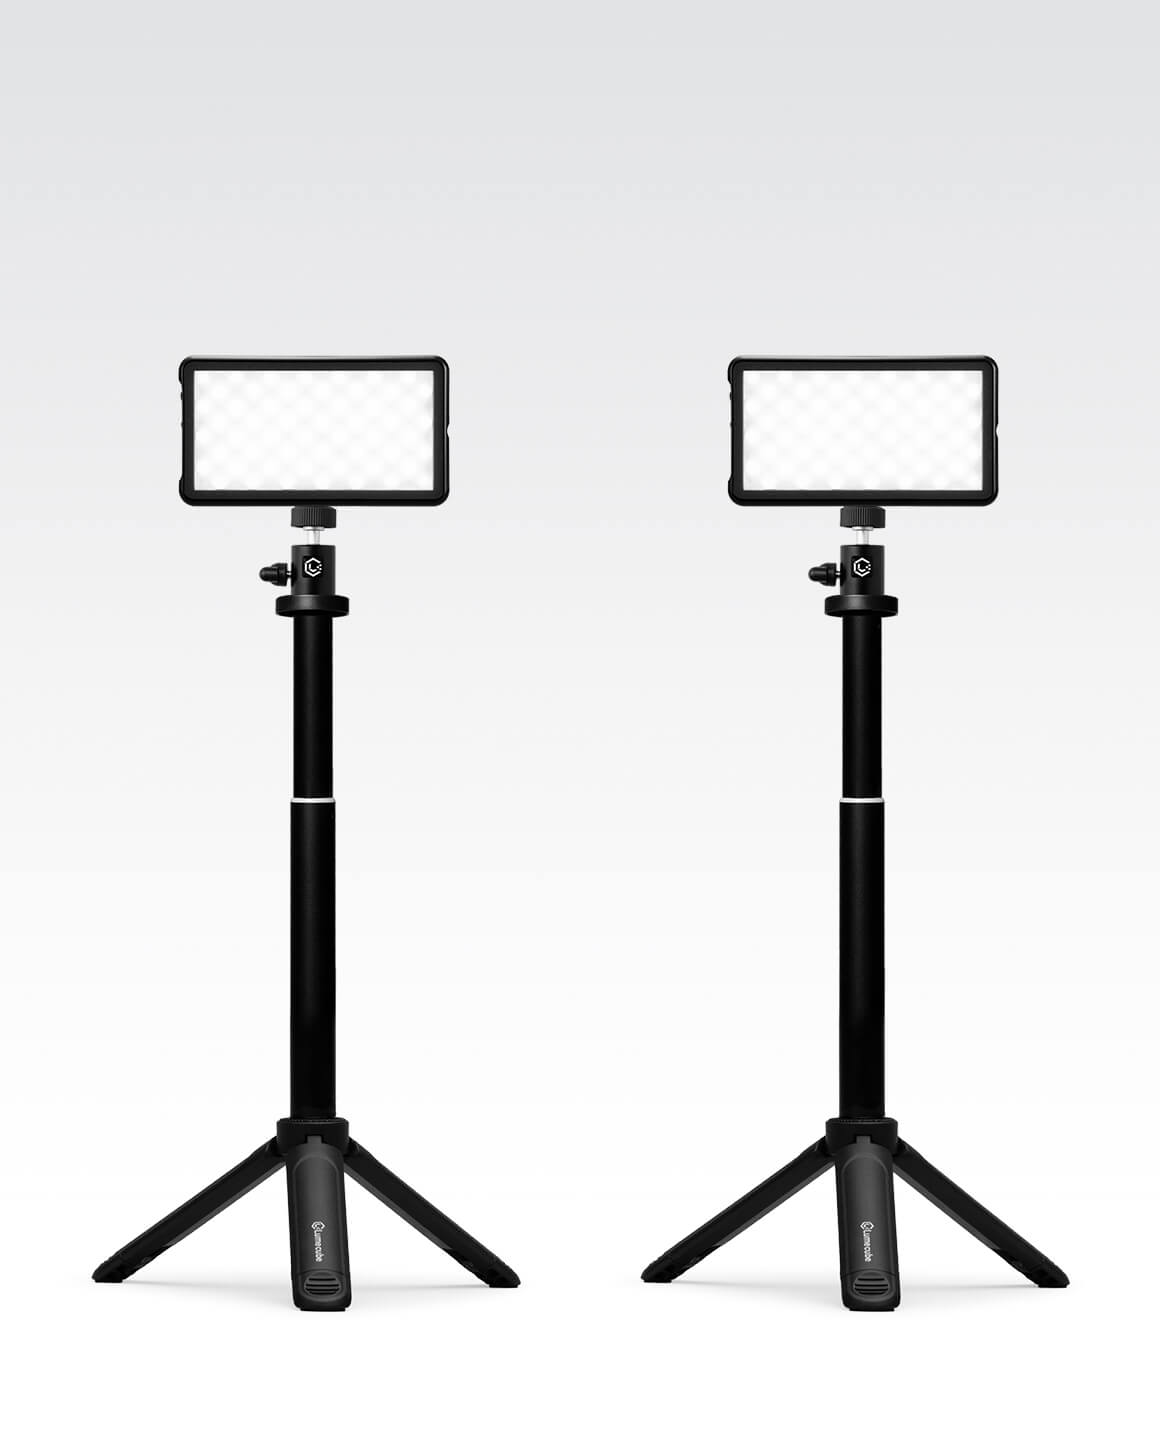 Two Lume Cube Broadcast Lighting Kits with black metal adjustable stands and bicolor LED panels.